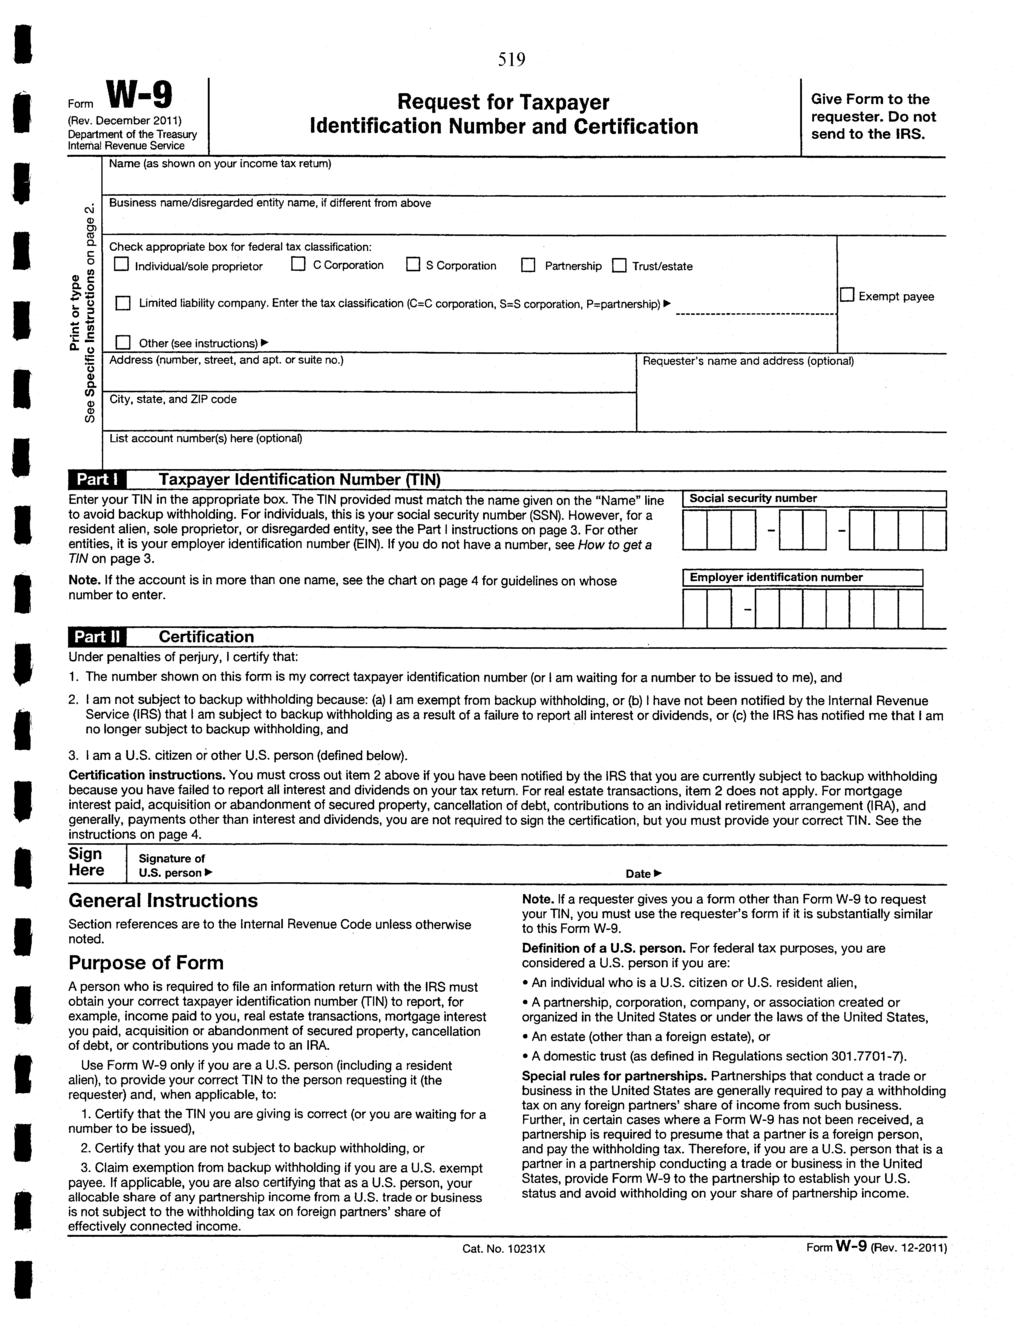 519 Form W-9 Request for Taxpayer Give Form to the (Rev.